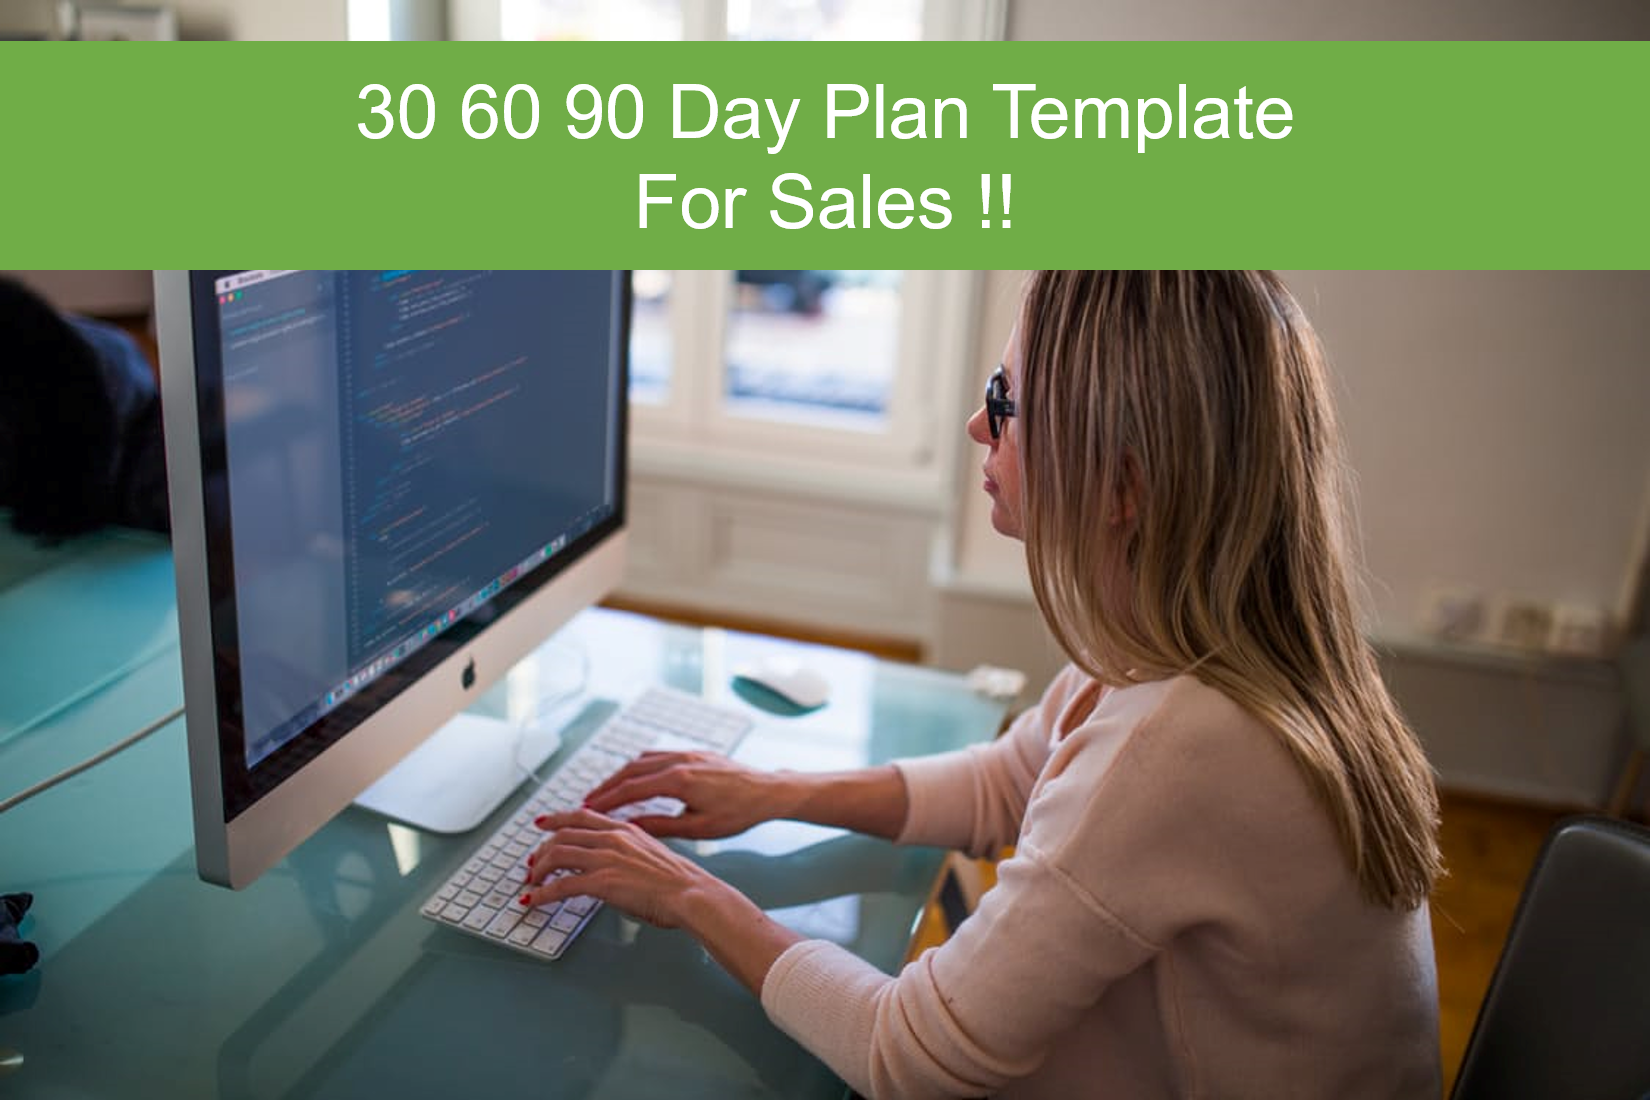 30 60 90 day plan template for sales